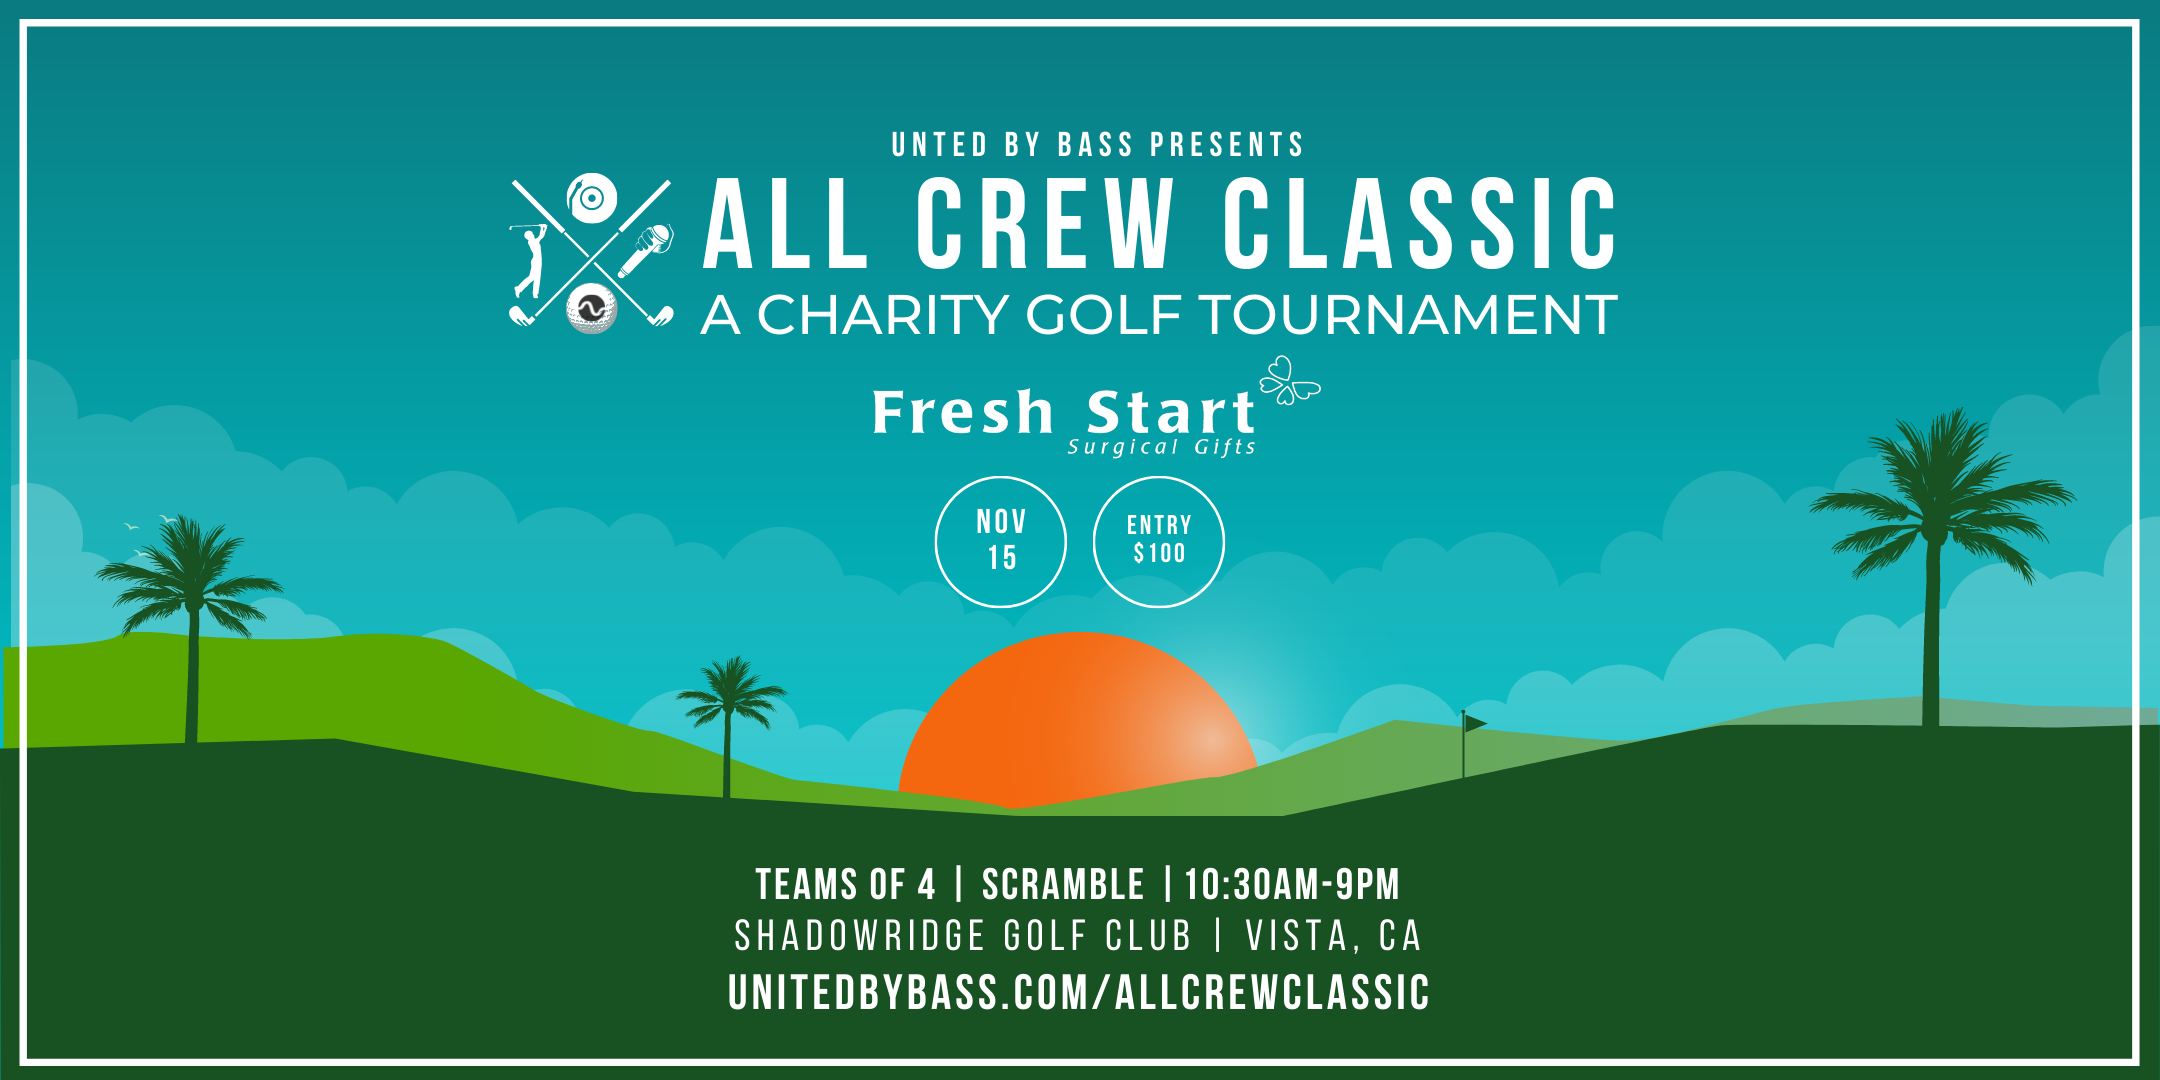 The All Crew Classic Charity Golf Tournament